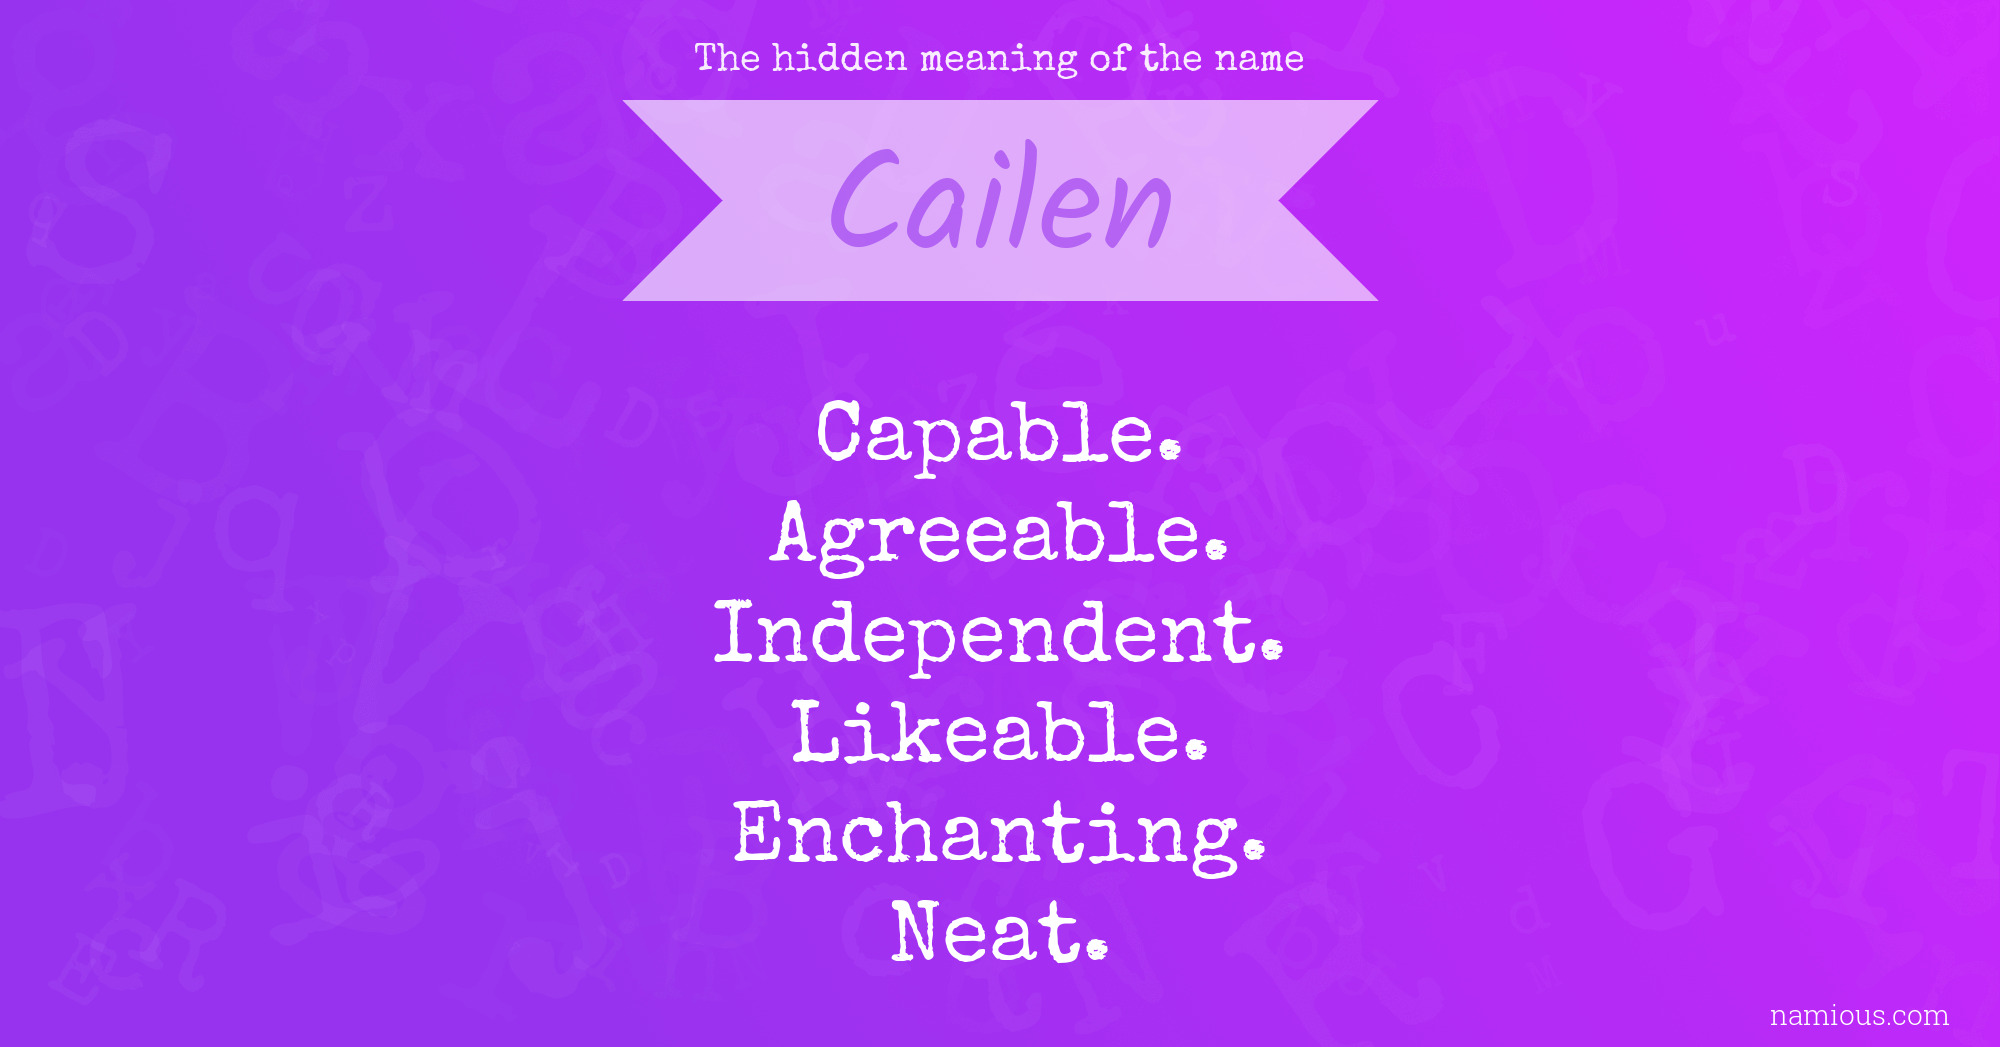 The hidden meaning of the name Cailen